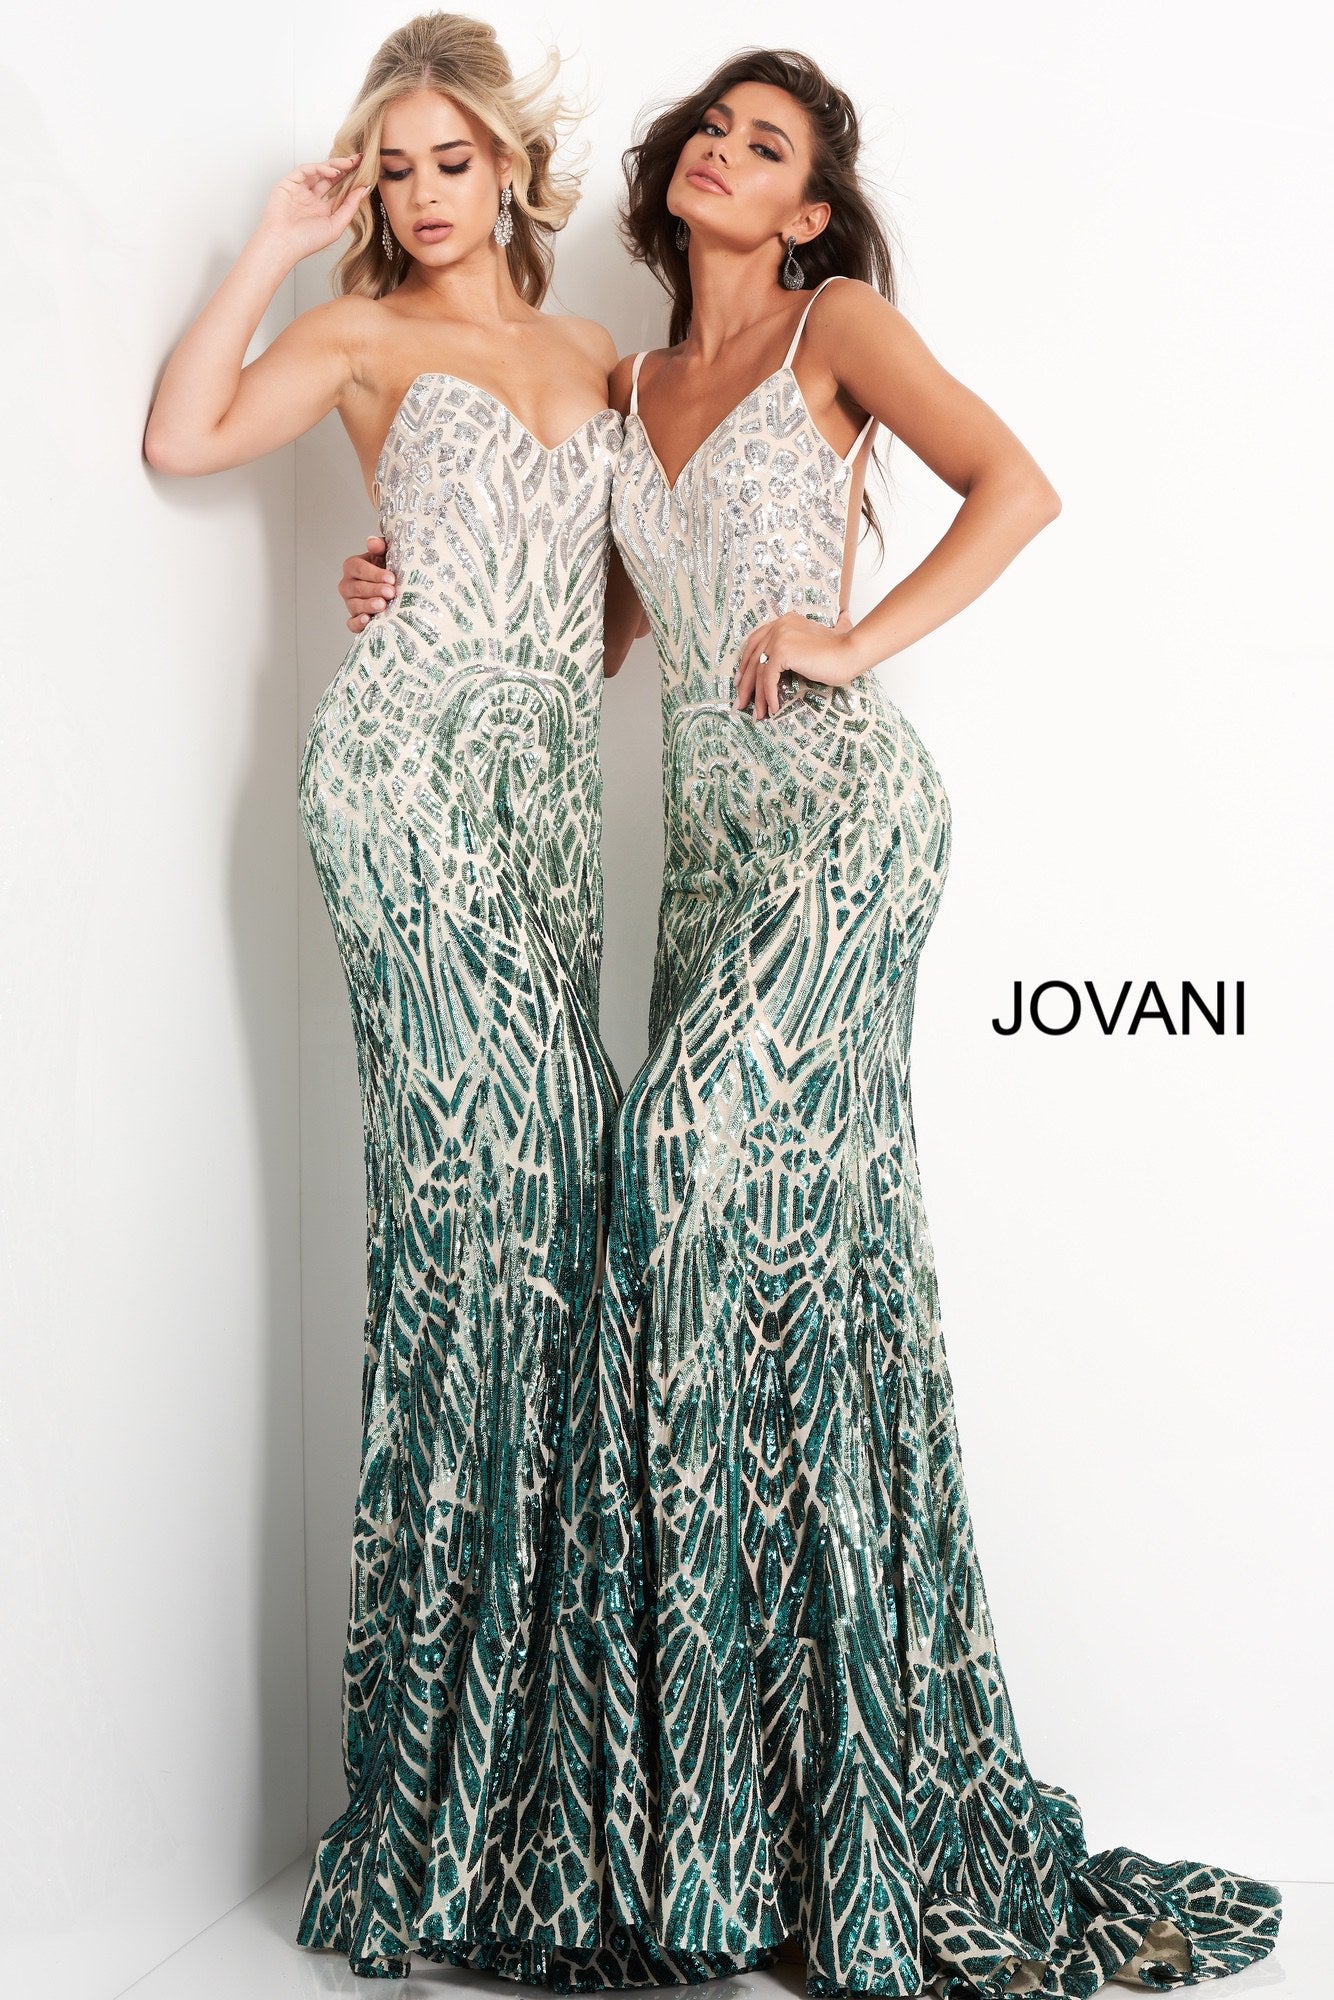 Jovani 06459 is a long fitted Formal Evening Gown. This Strapless Prom Dress Features a Backless open back with a corset style lace up closure. Peak point strapless neckline. Fully Embellished with Sequins in a cascading geometric pattern in an Ombre Design. Lush trumpet skirt with a sweeping train. Perfect for pageants! Available Sizes: 00,0,2,4,6,8,10,12,14,16,18,20,22,24  Available Colors: Silver/Cafe, Silver/Green